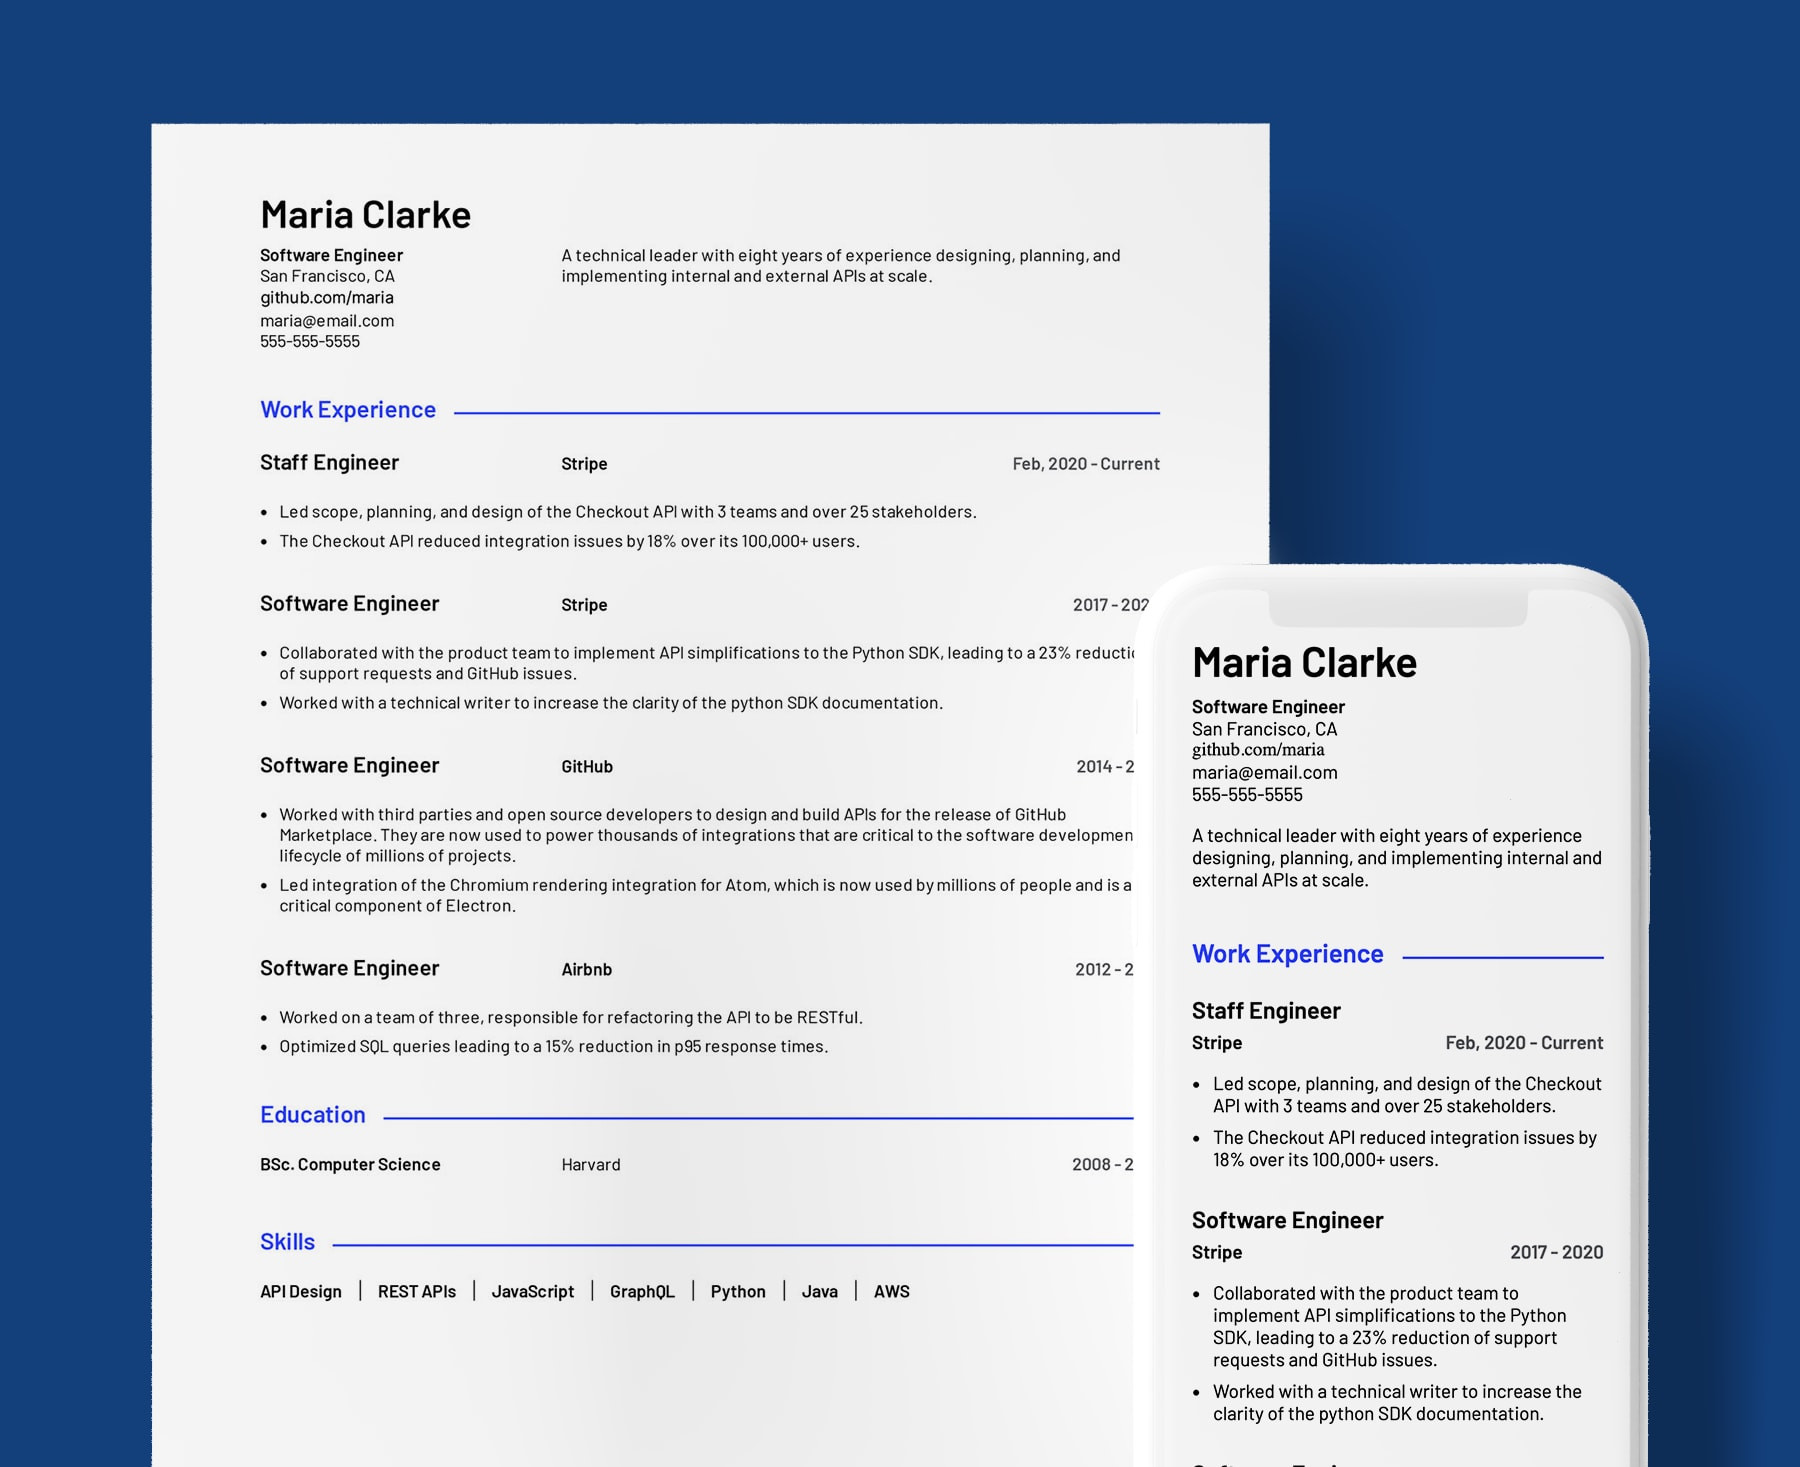 Resume Samples Of Engineer with 2 Years Work Experience Professional Resume Templates to Impress Recruiters